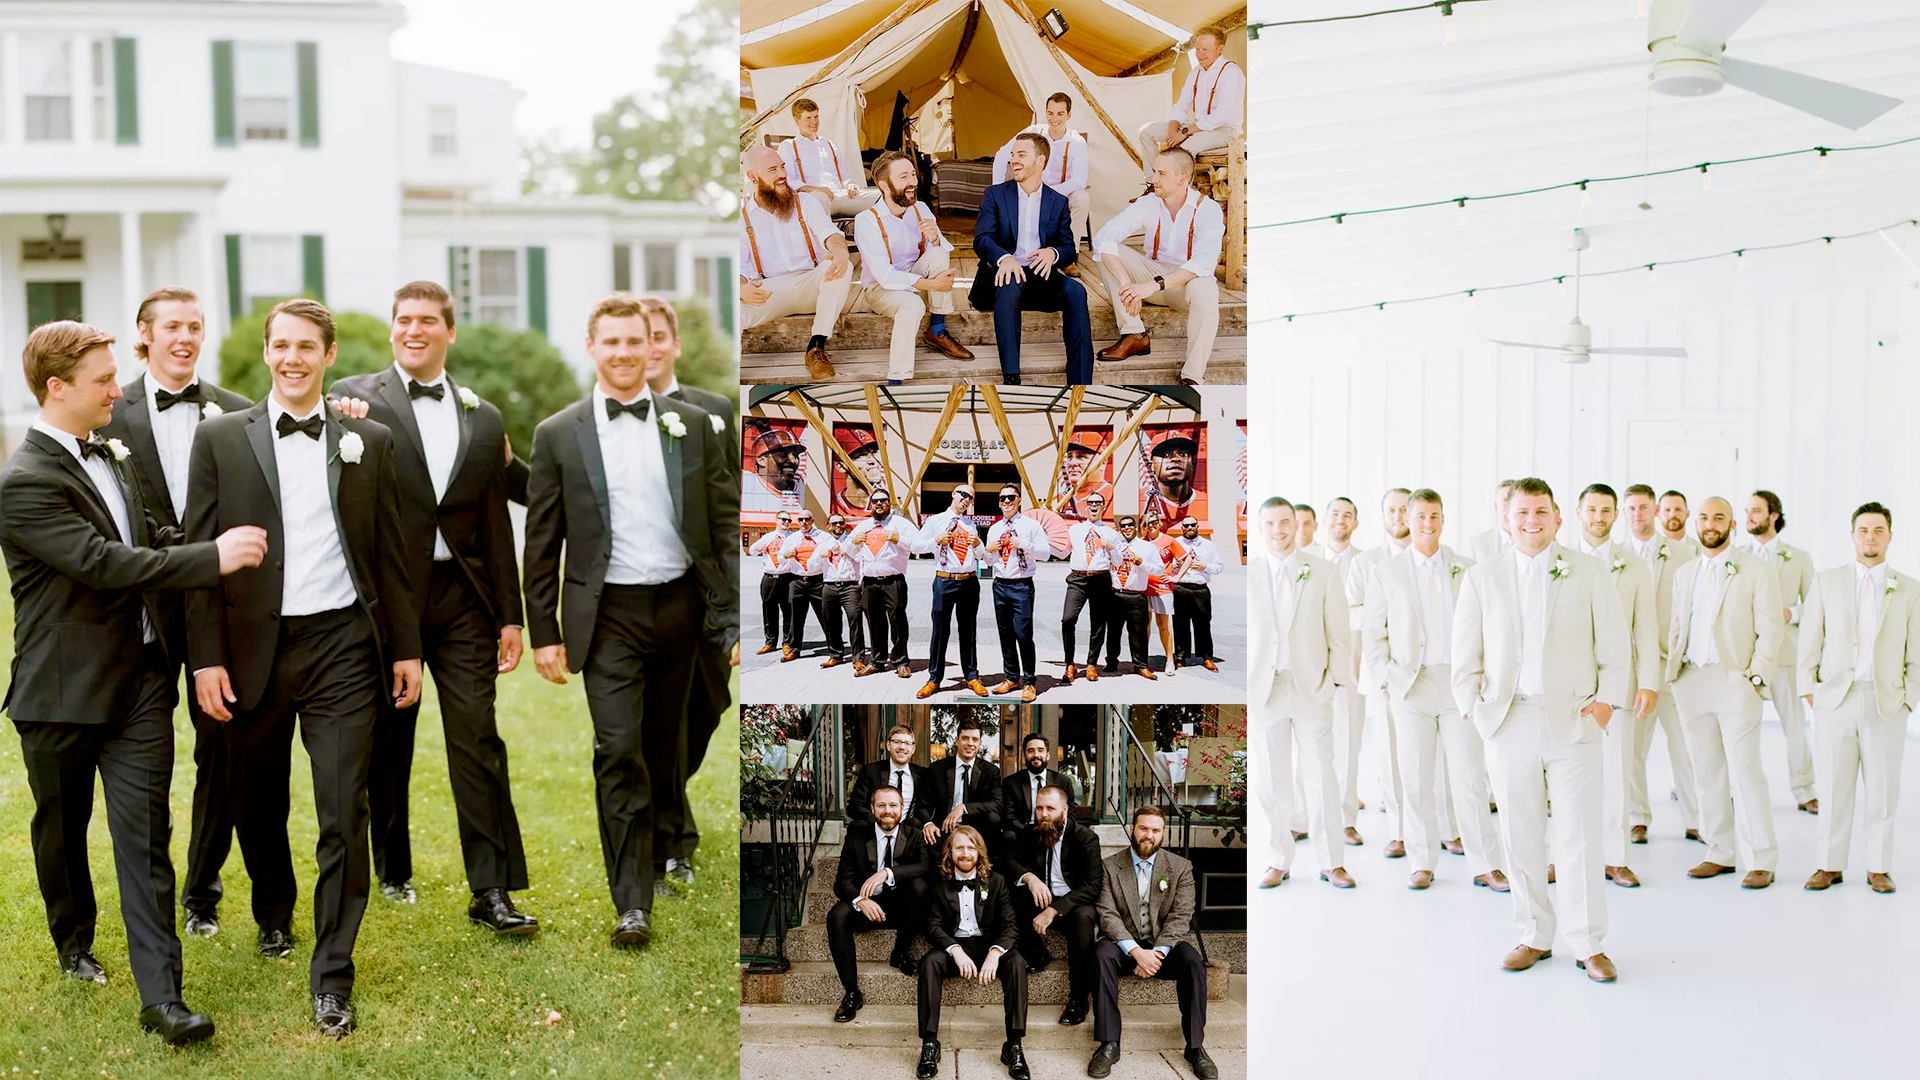 Looking For Groomsmen Outfits That Complement Your Venue And Theme - Here Are 13 Awesome Ideas That Will Stand Out At The Altar